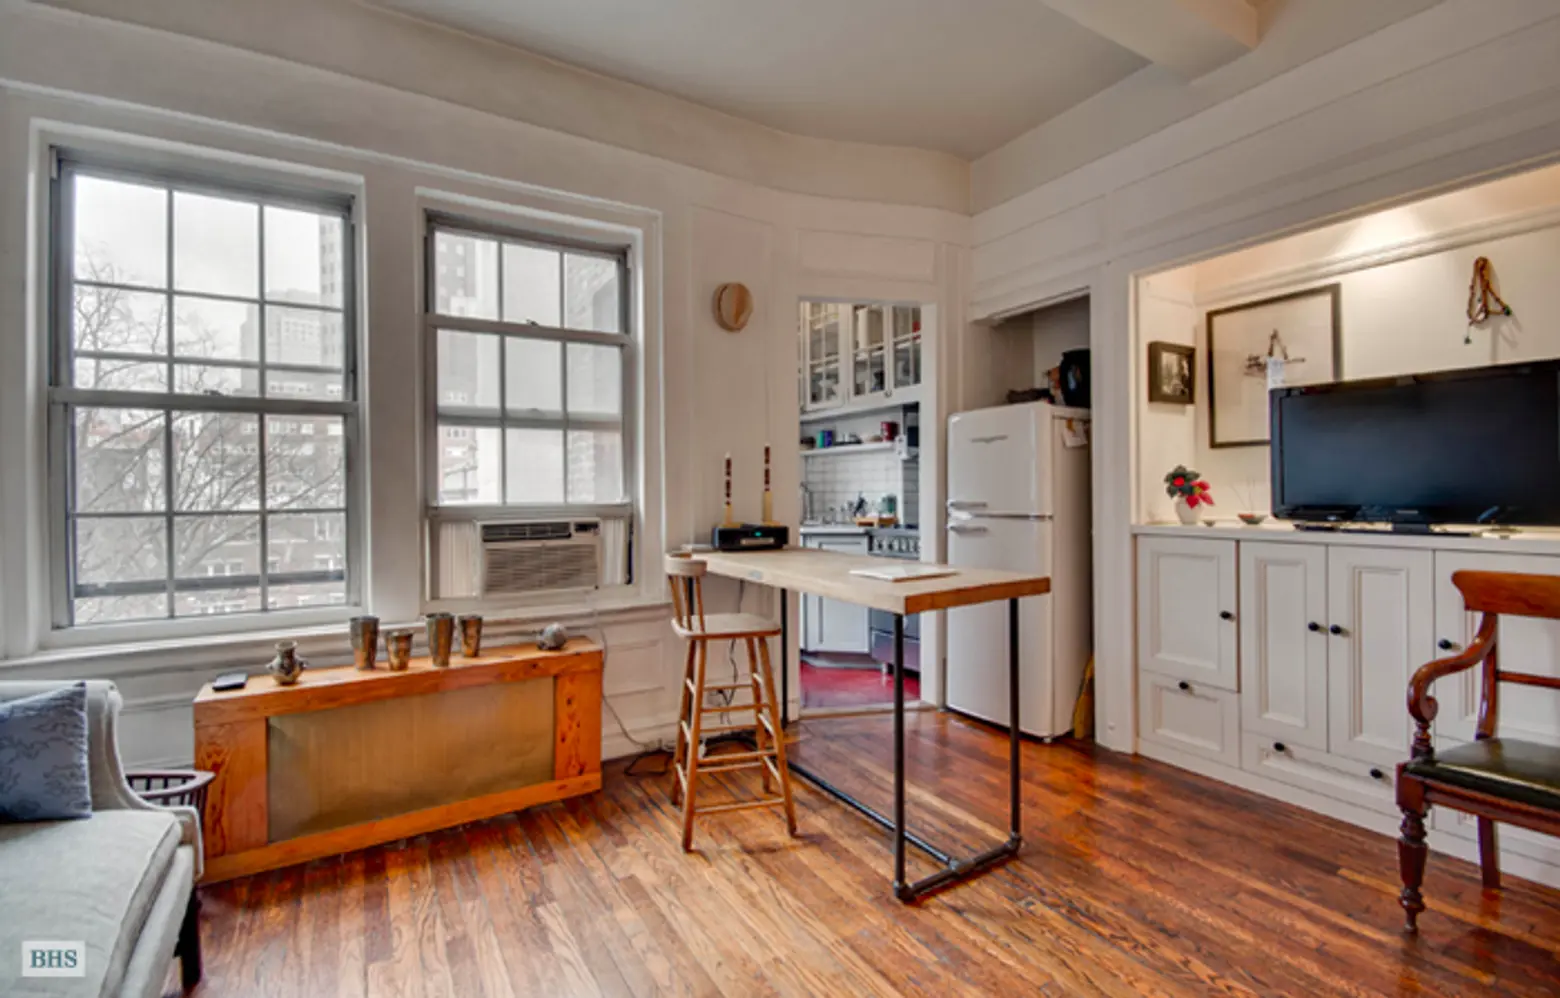 Sweet Brooklyn Heights Beauty Has More Than One Room with a View